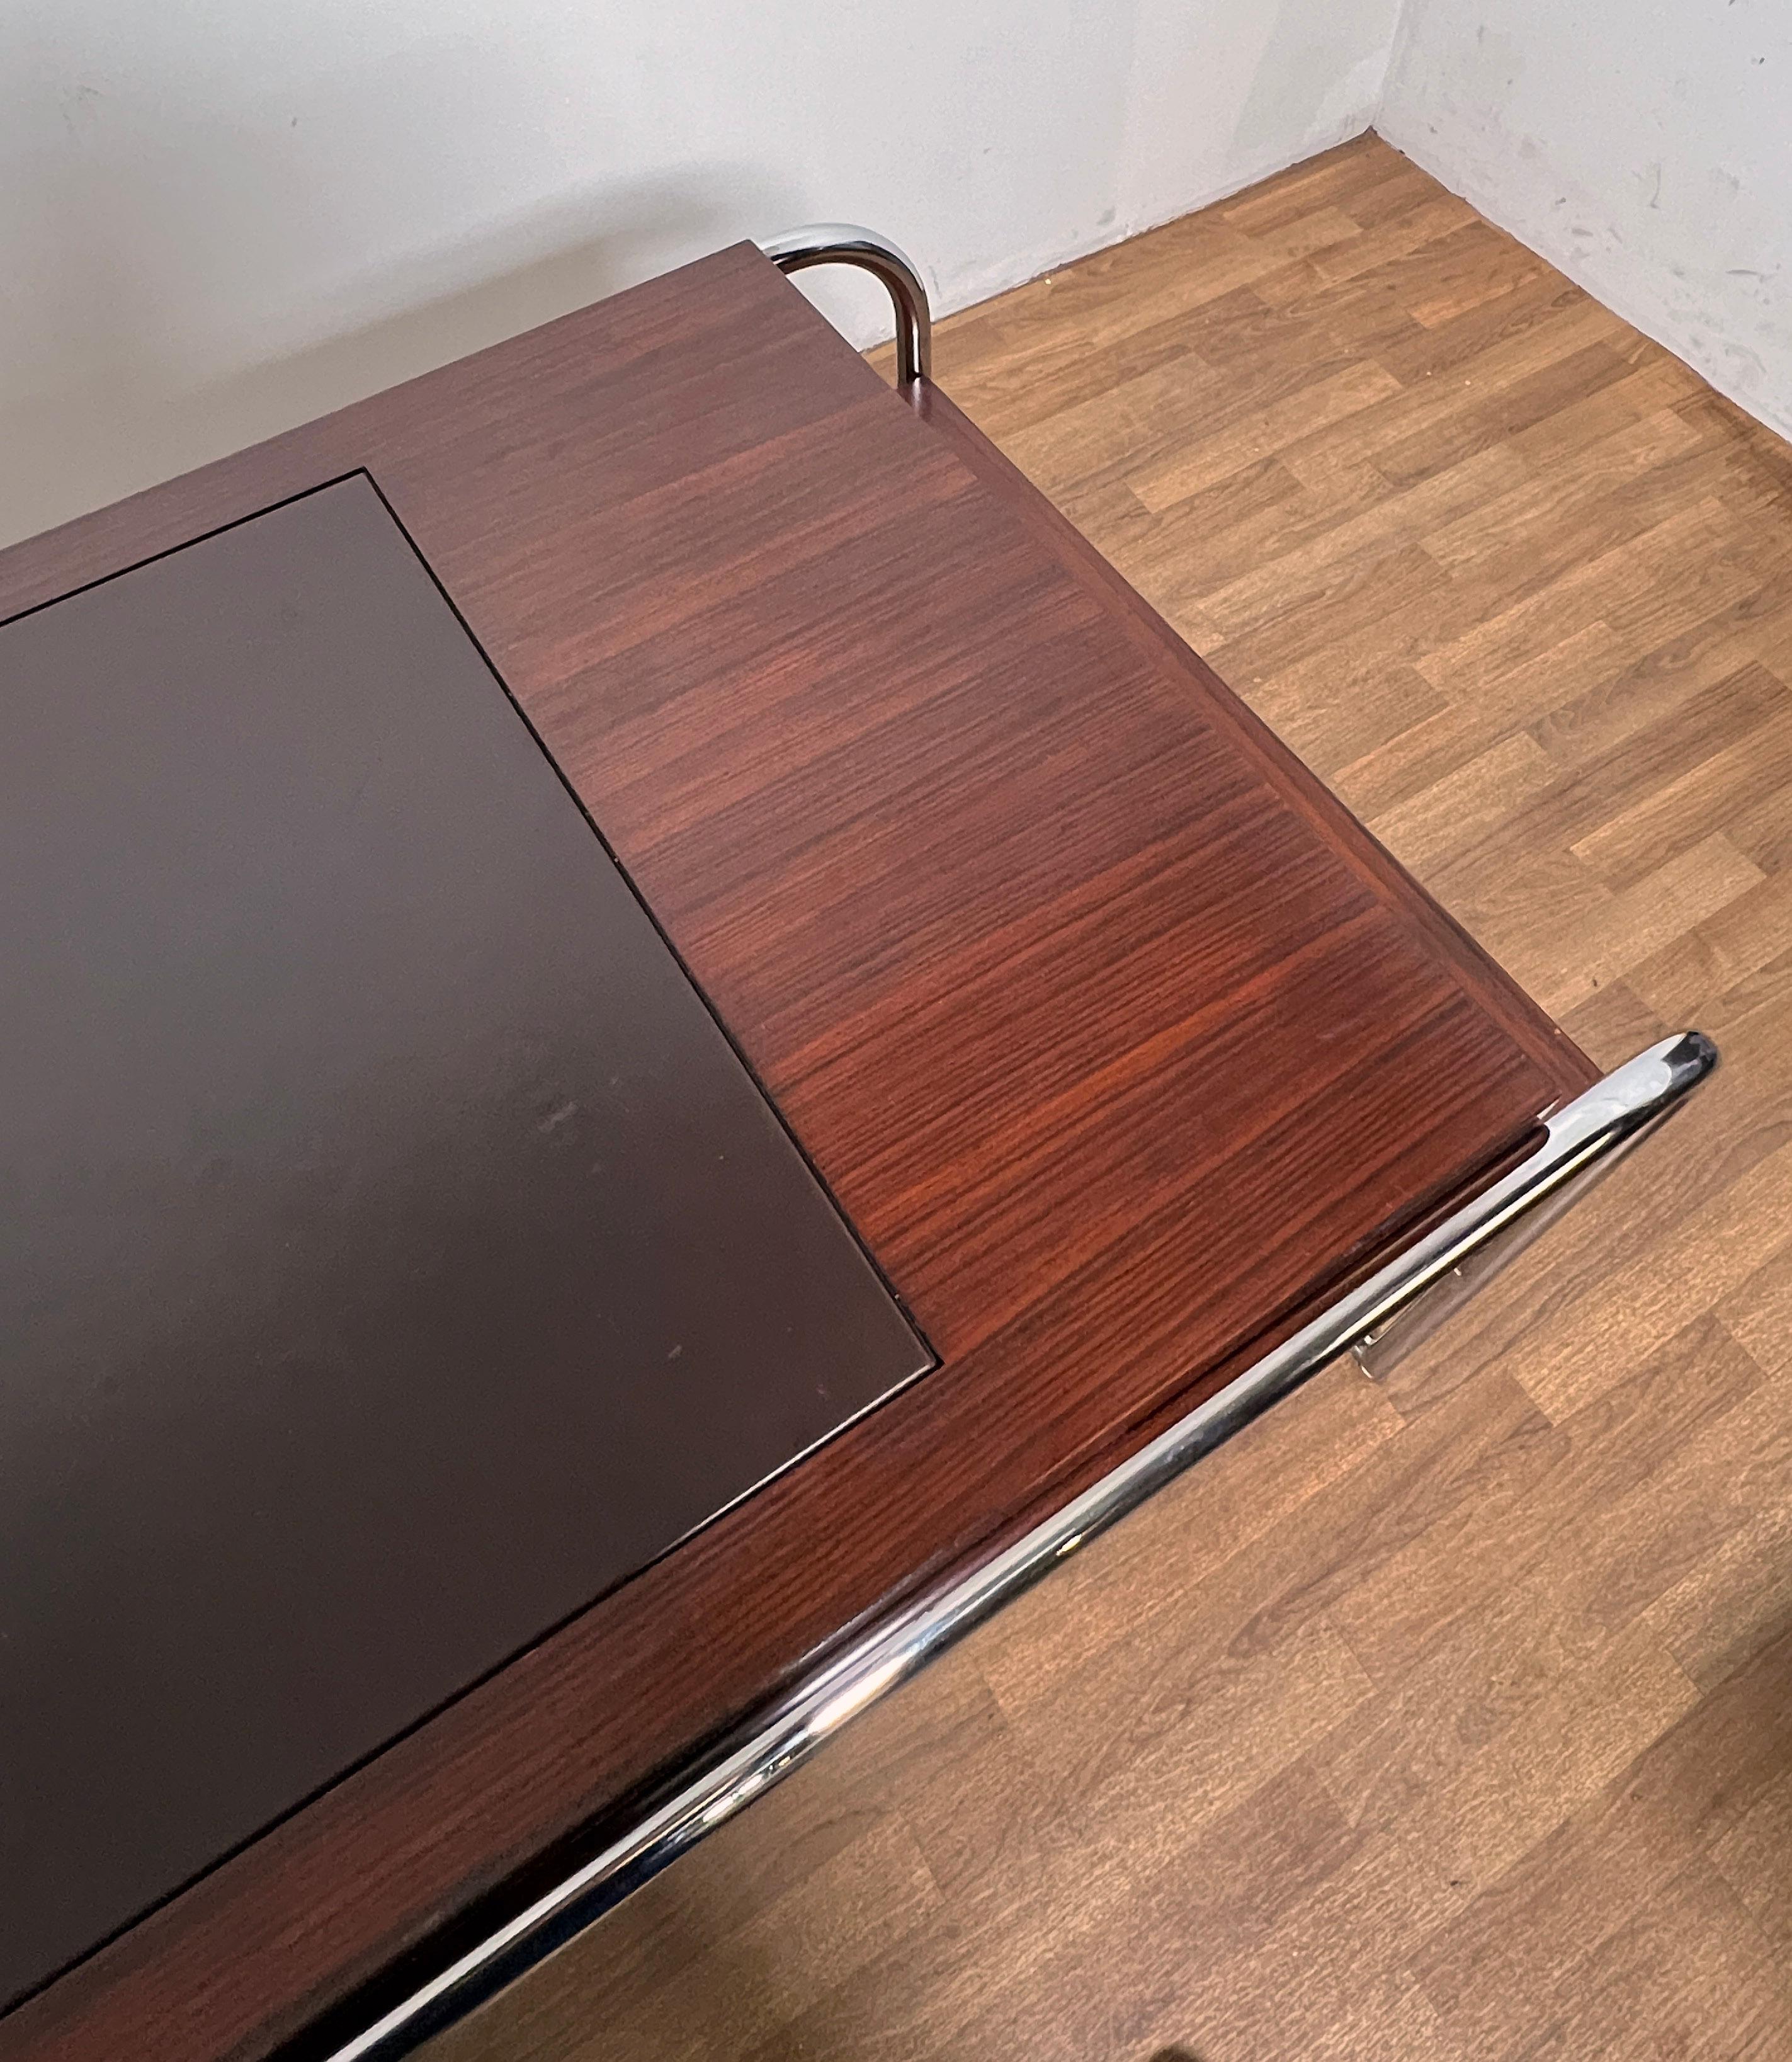 Ralph Lauren Bauhaus Inspired Desk in Wenge, Chrome and Leather 5